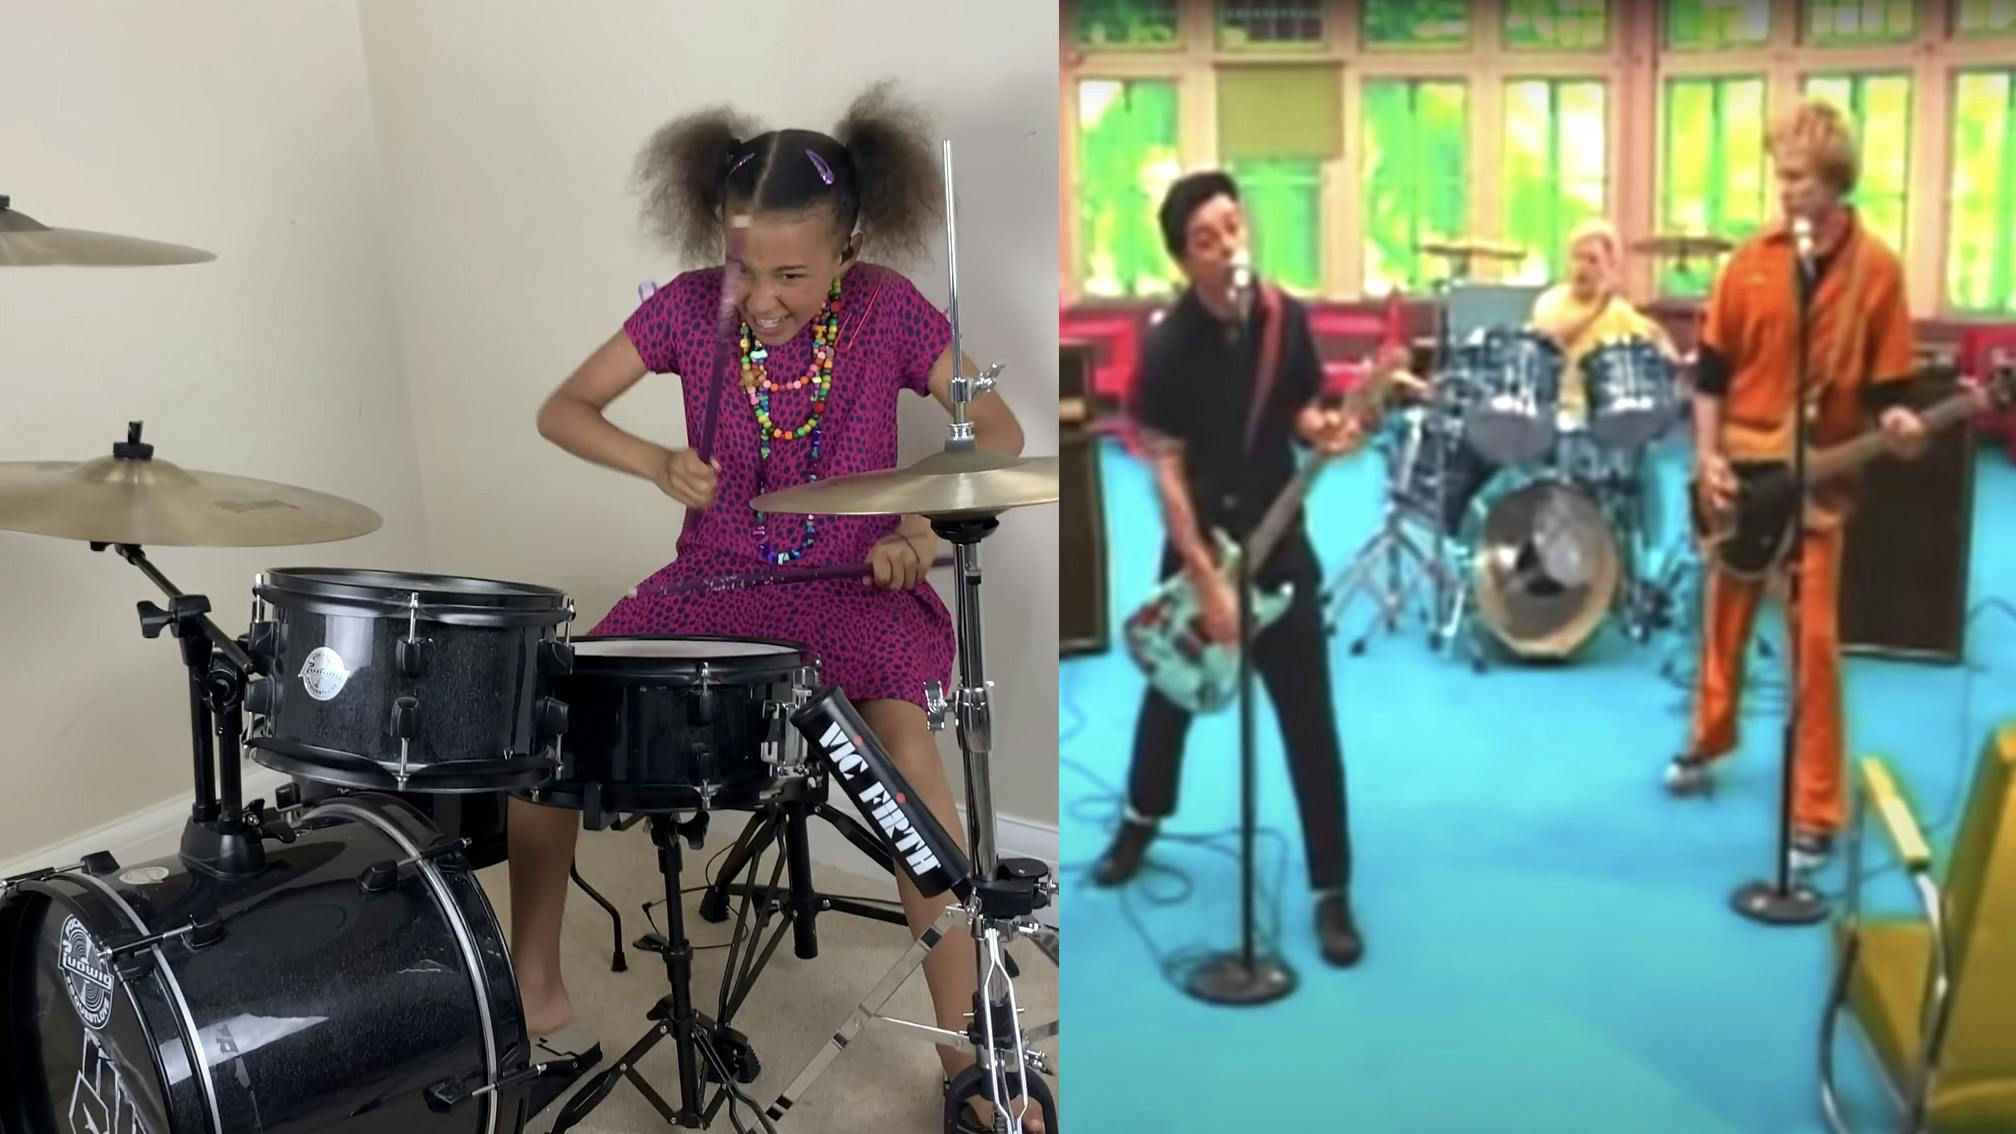 Watch This 10-Year-Old's Energetic Drum Cover Of Green Day's Basket Case